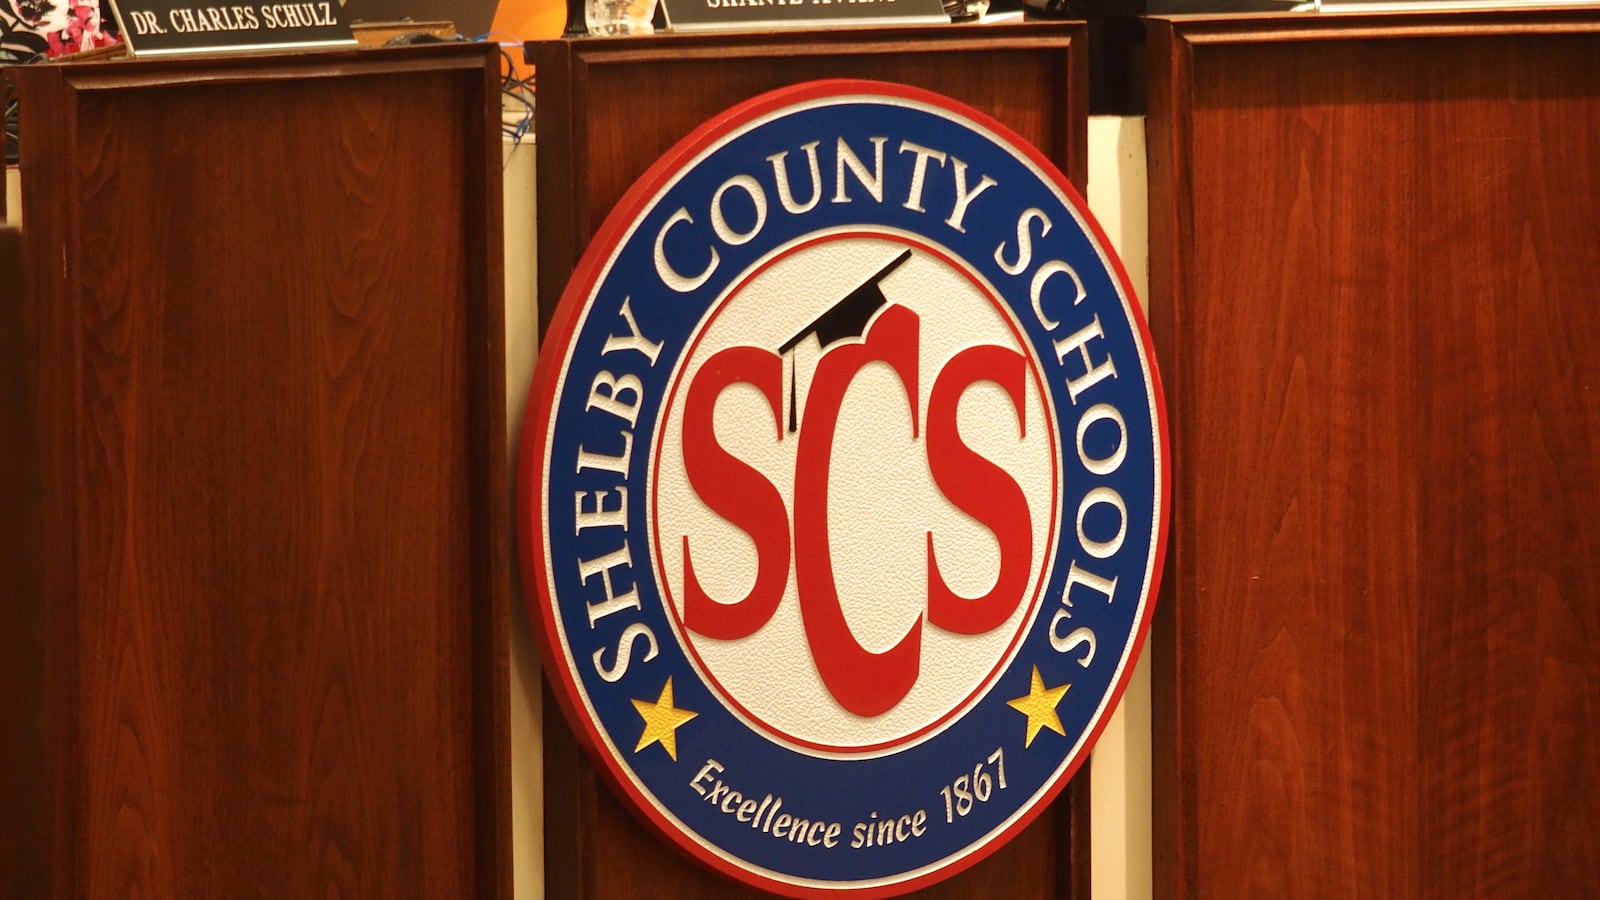 Shelby County Schools logo, SCS surrounded by a white circle, enclosed by a blue circle reading “Shelby County Schools.”